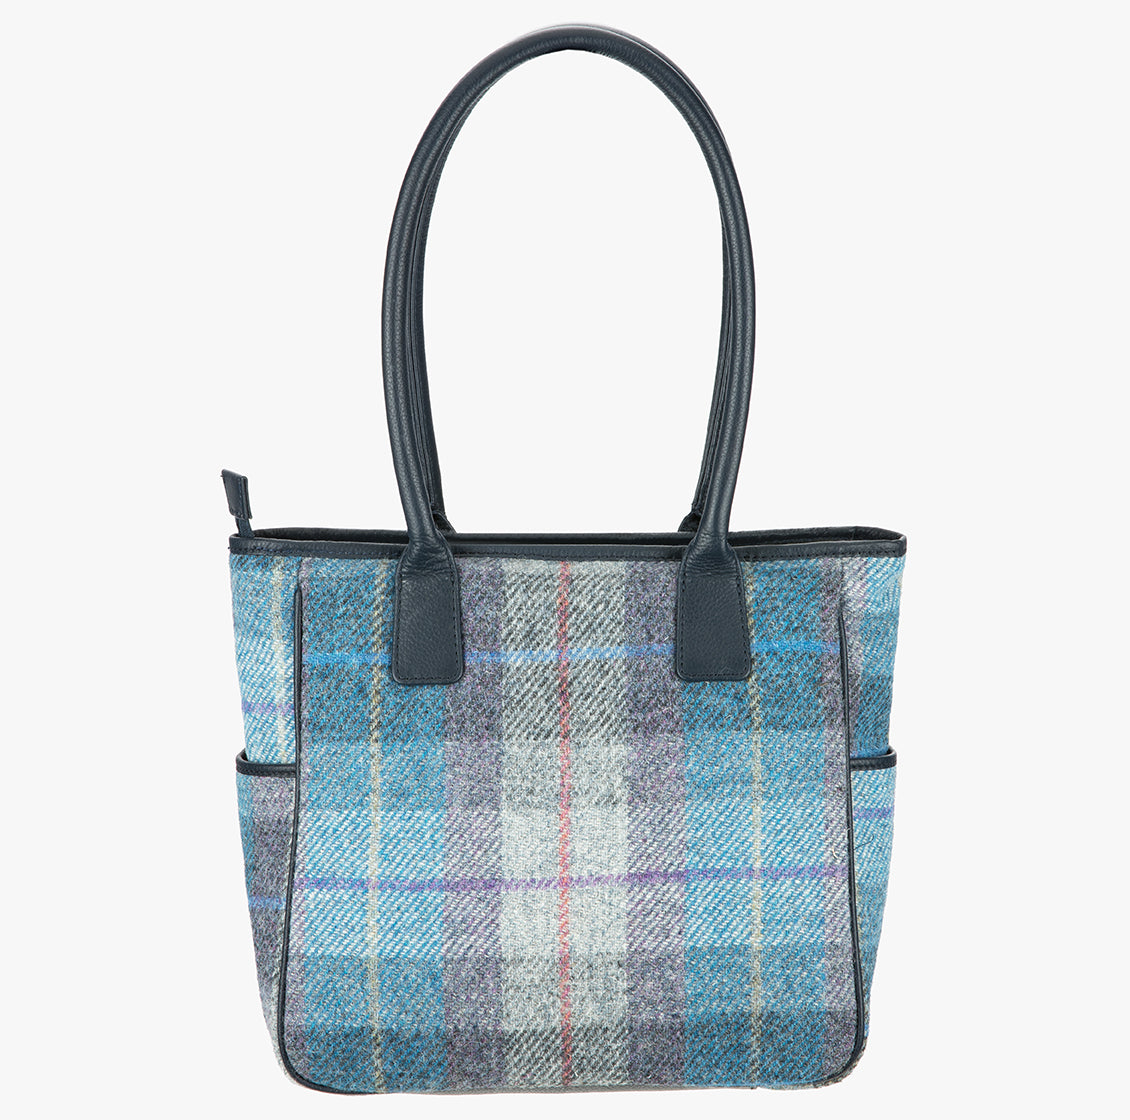 This is the reverse of the Harris Tweed tote bag in pale blue, purple and grey check with handles which go over the shoulder. This bag is Lavender Harris Tweed with navy blue leather handles. It has a pocket on each side of the bag trimmed with navy leather.